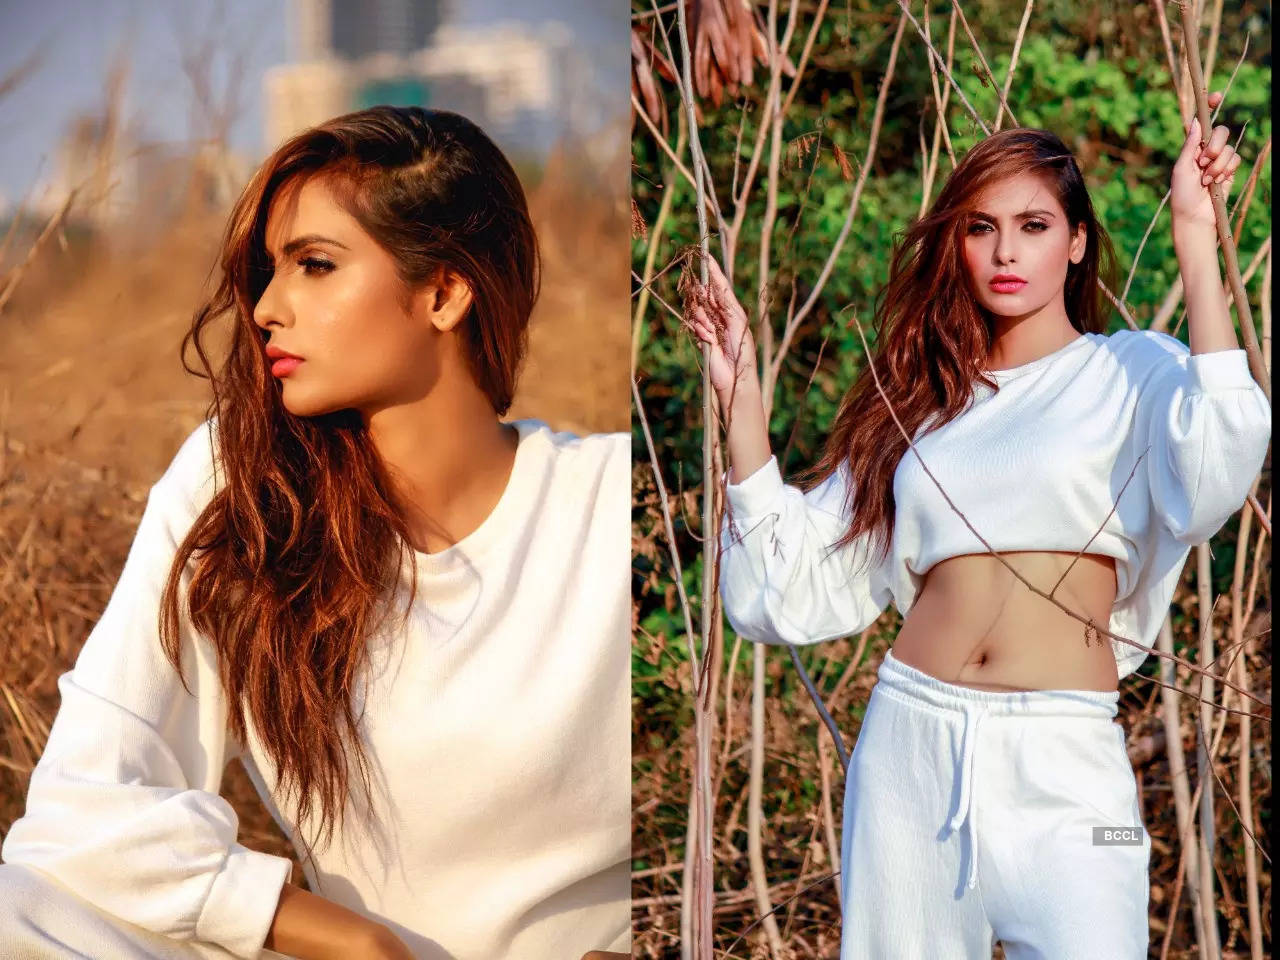 Pictures of Miss India International Ayeesha S Aiman take the internet by storm